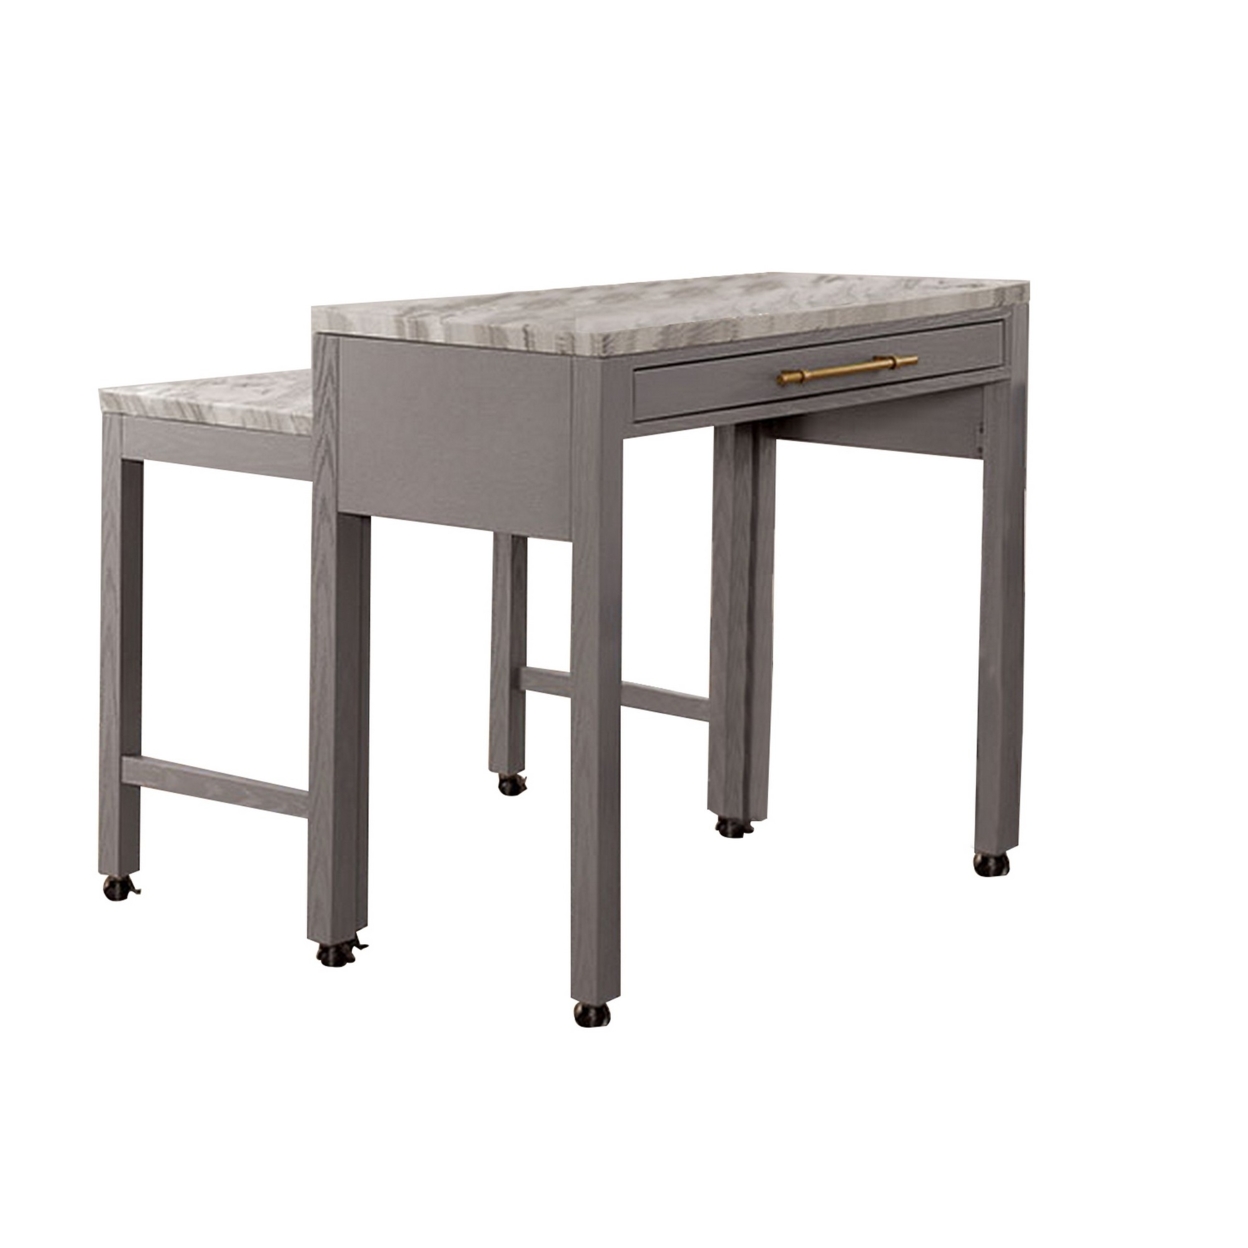 39 Inch Faux Marble Top Table With Felt Lined Storage Drawer, Gray, White - Saltoro Sherpi